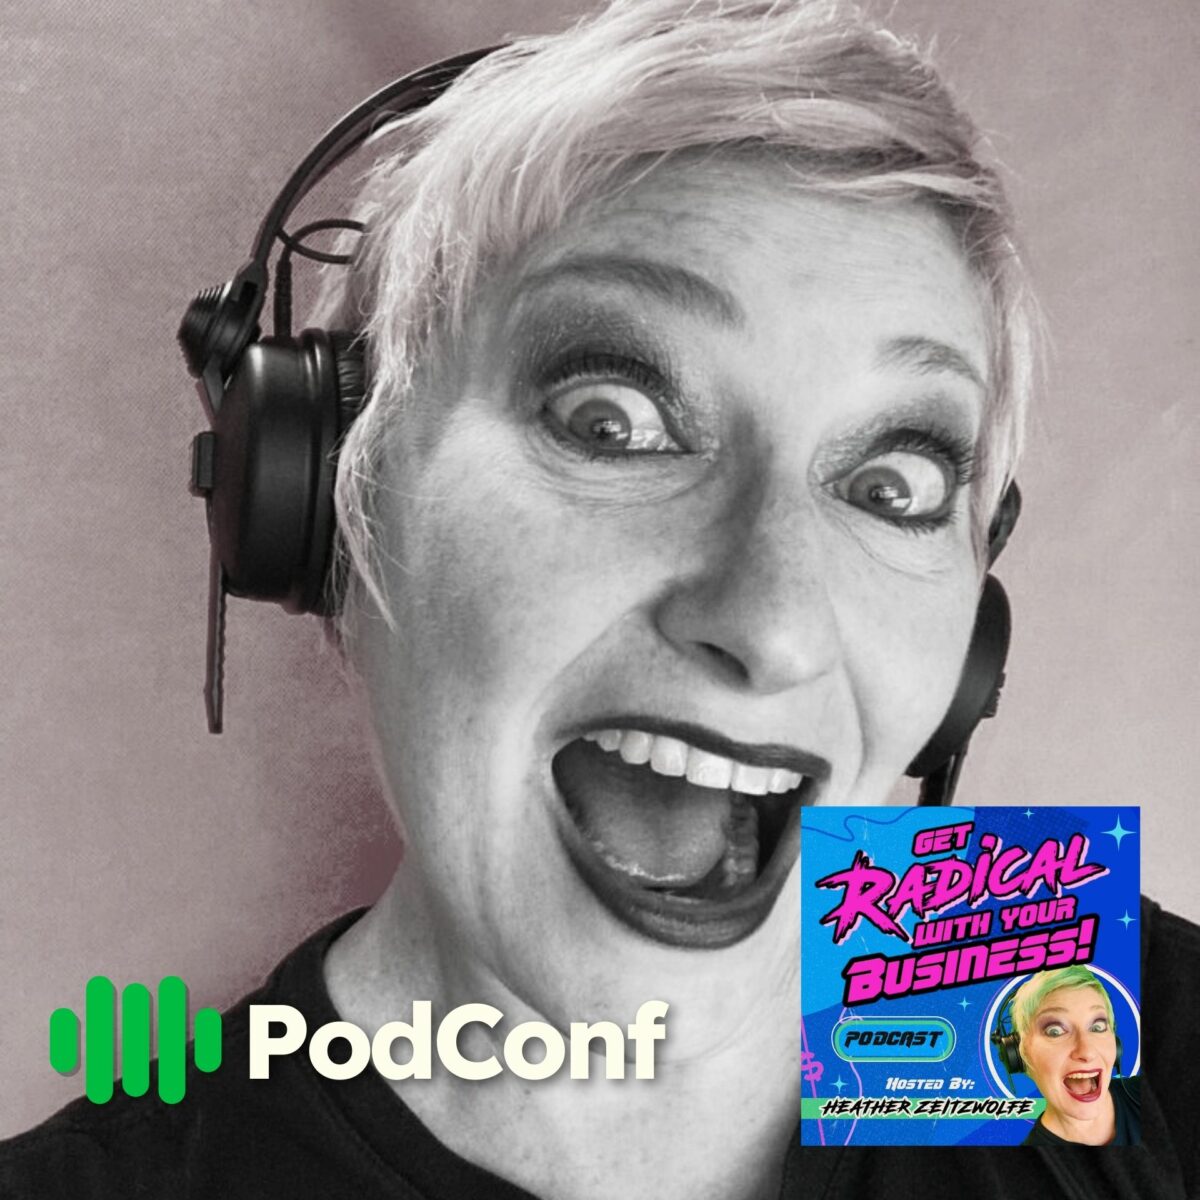 Heather Zeitzwolfe / Get Radical With Your Business / PodConf